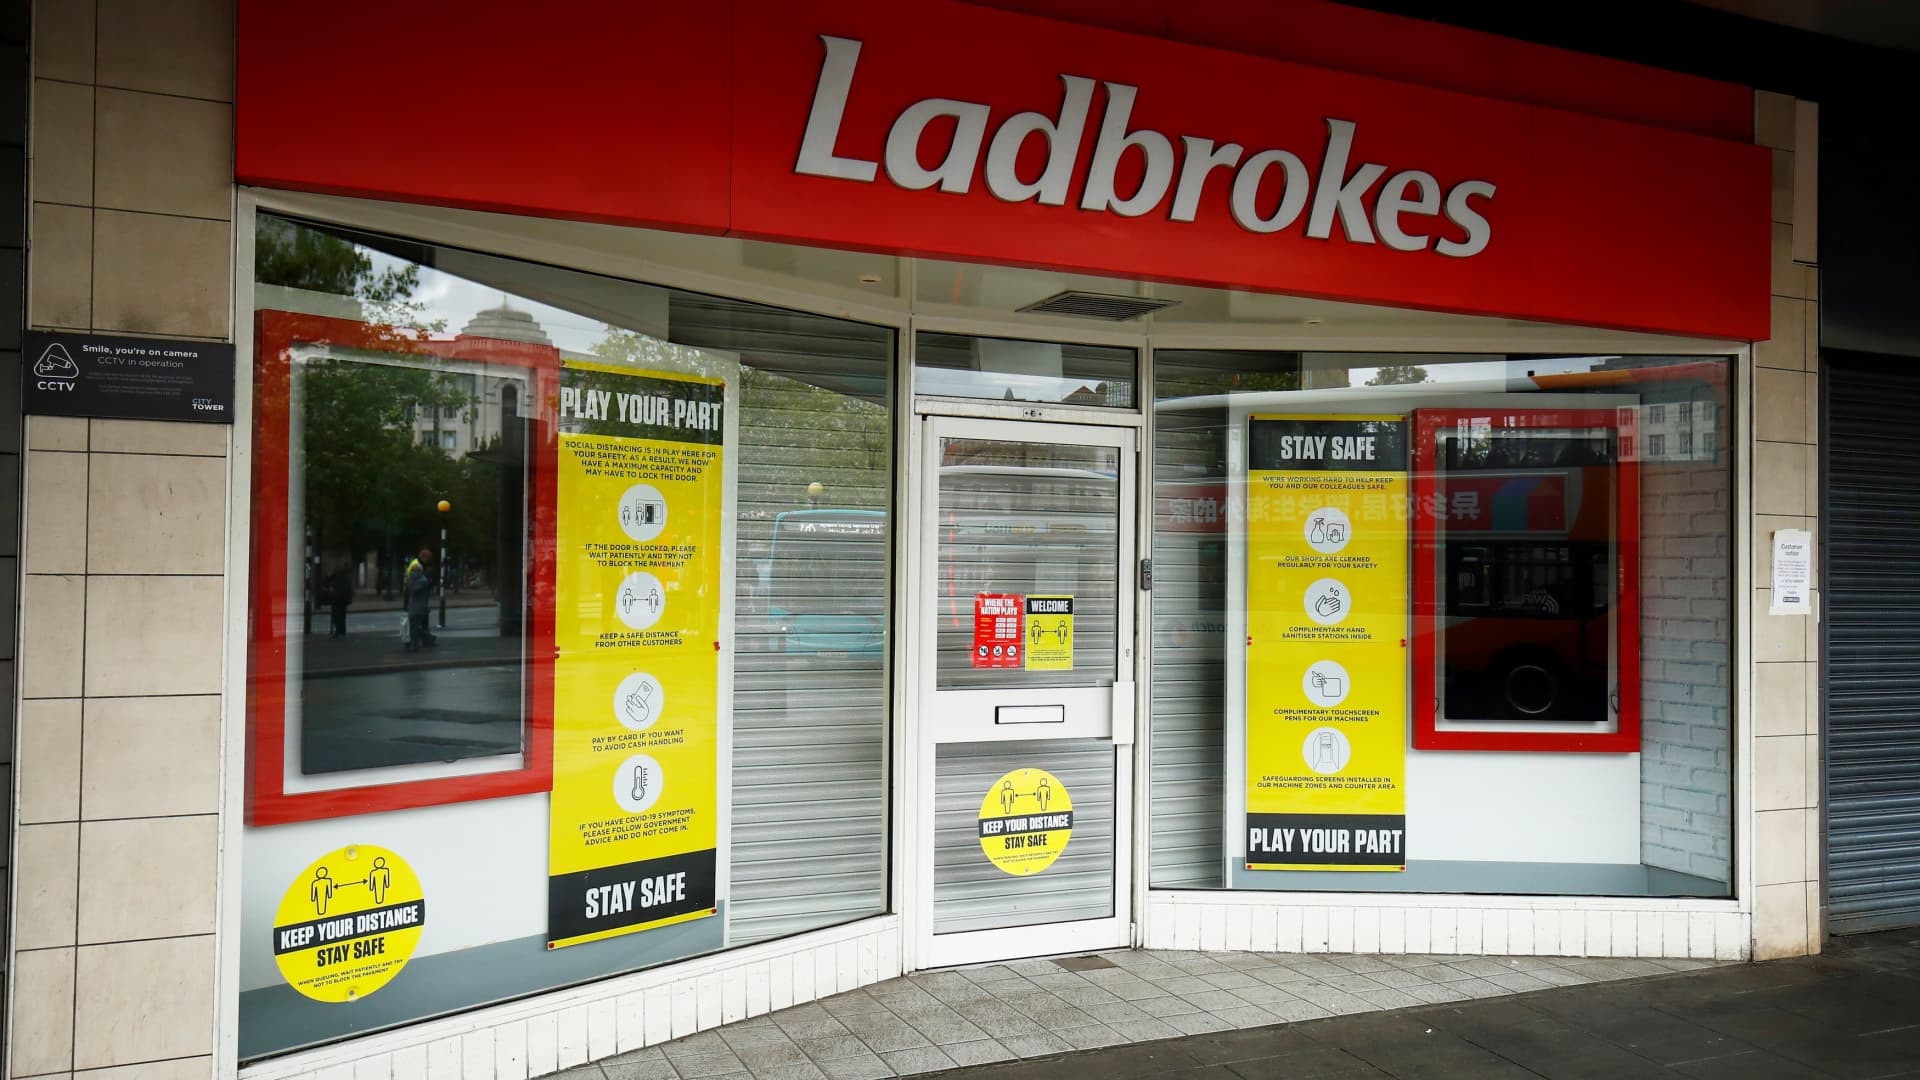 A closed Ladbrokes is seen in Manchester, following the outbreak of the coronavirus disease (COVID-19), Manchester, Britain, June 12, 2020.